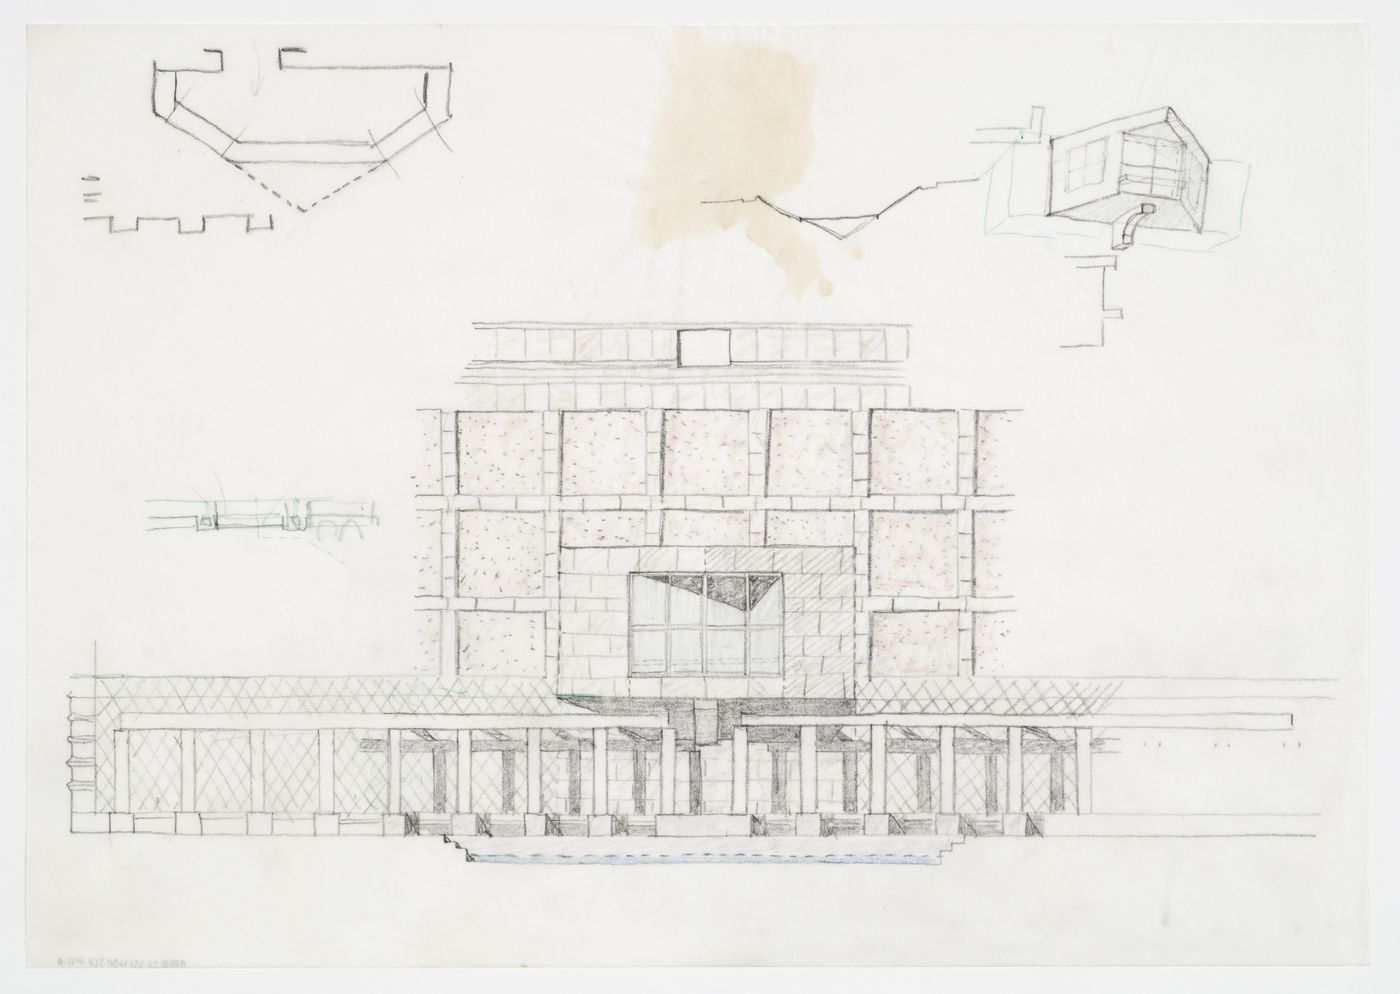 Clore Gallery, London, England: elevation and sketches